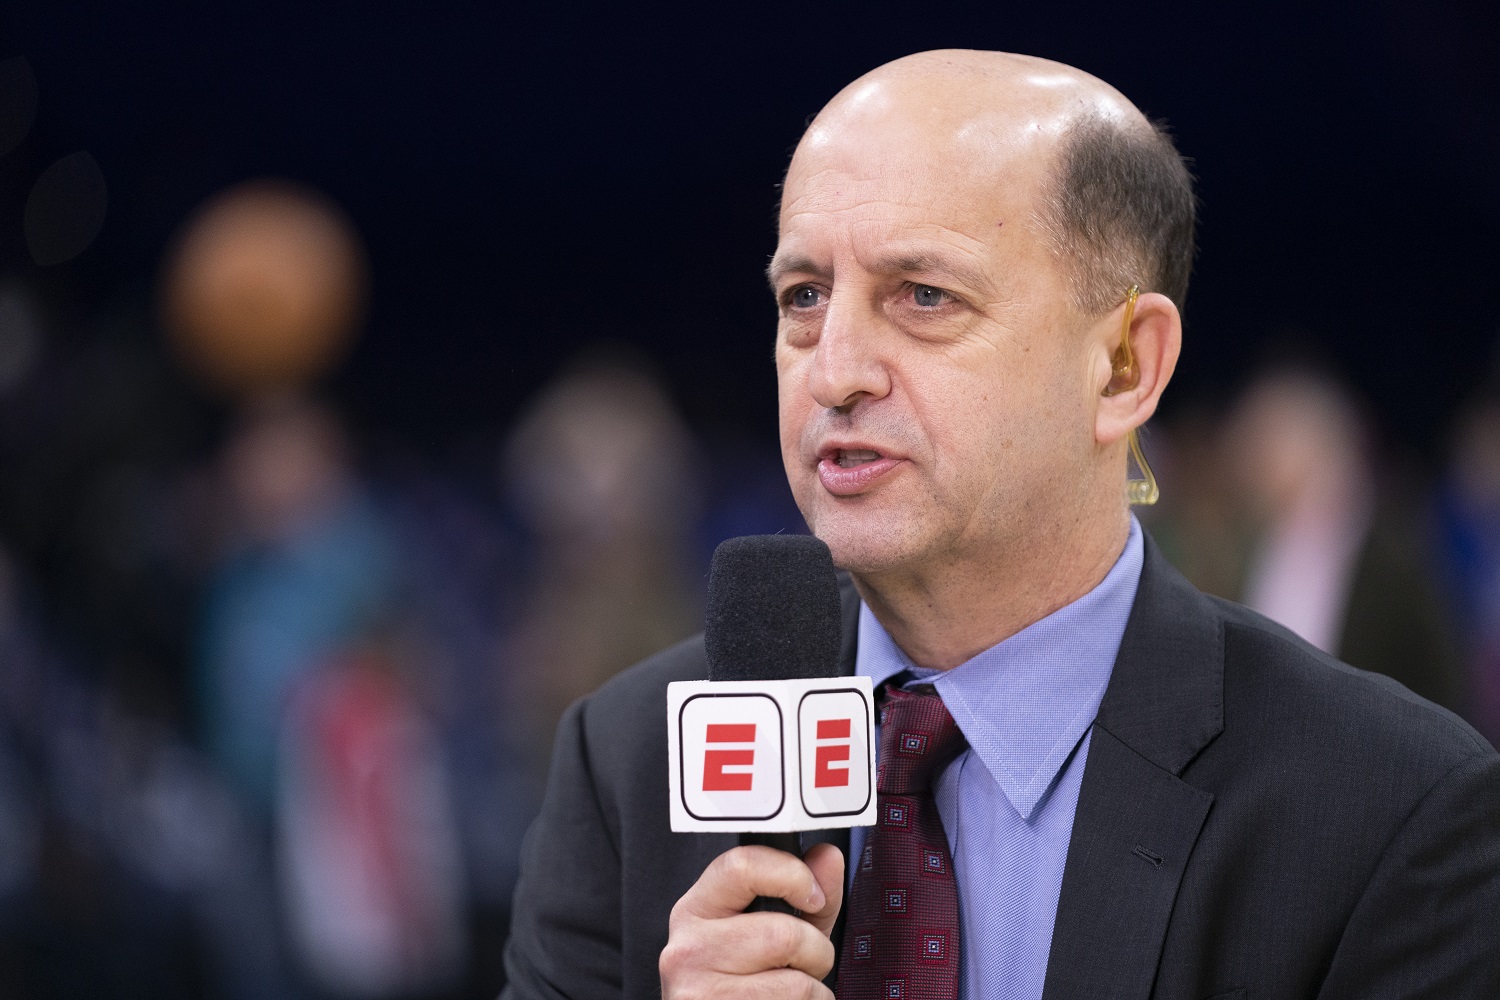 ESPN analyst Jeff Van Gundy talks prior to the game between the Miami Heat and Philadelphia 76ers at the Wells Fargo Center on Dec. 18, 2019.